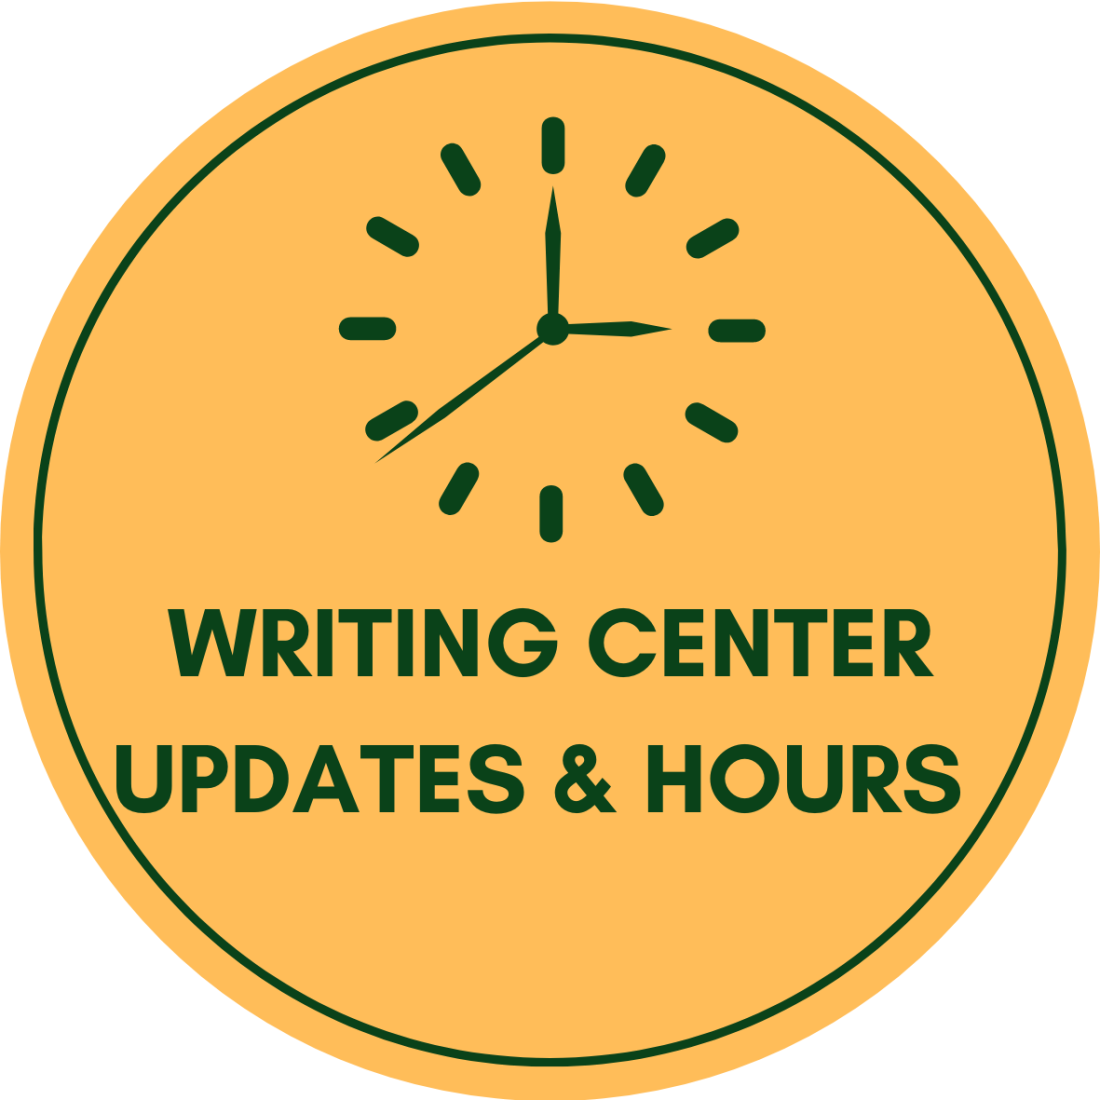 Writing Center Hours and Updates